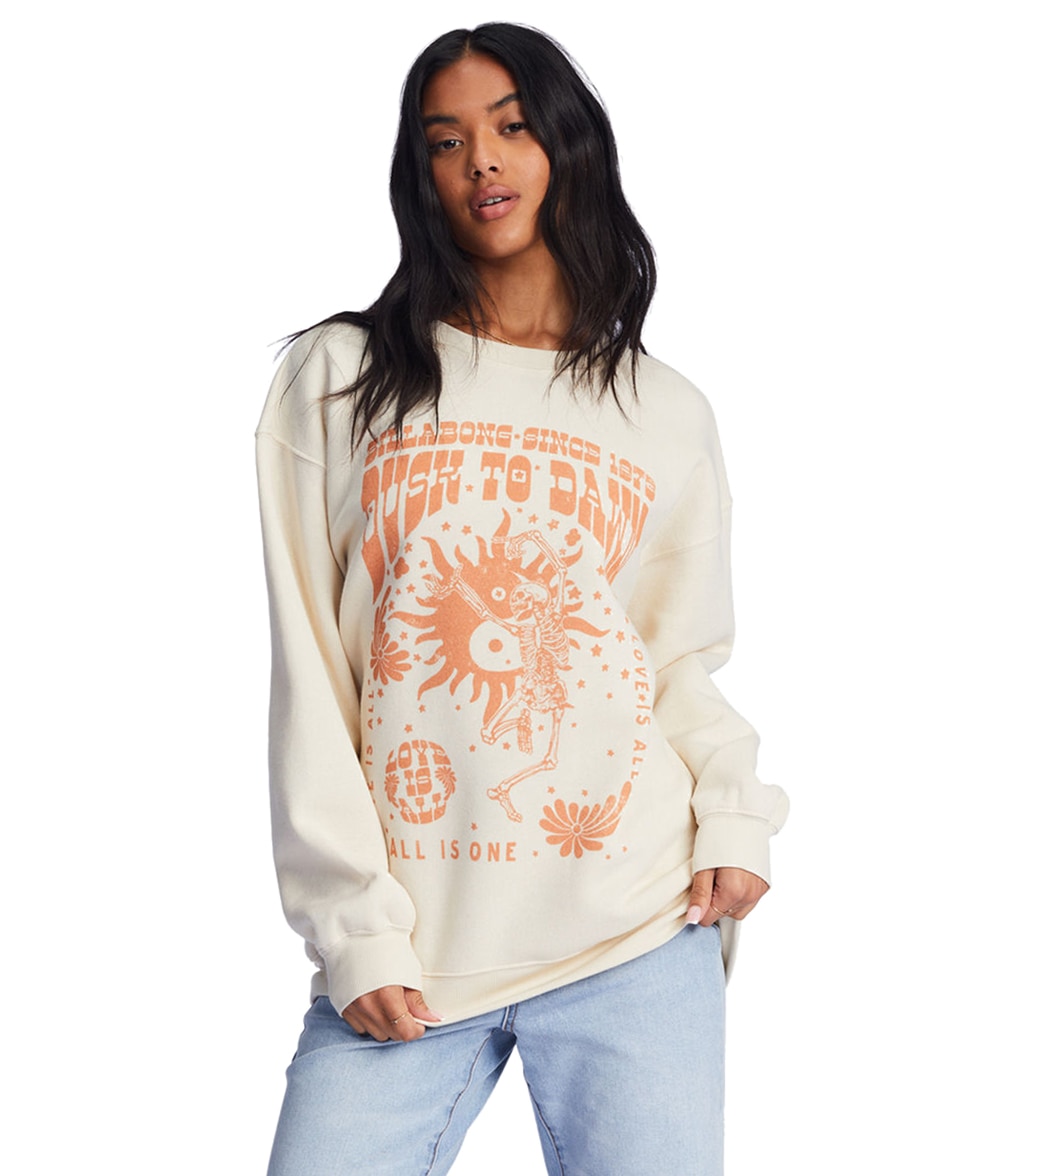 Billabong Women's All Is One Sweatshirt - Antique White Large Cotton/Polyester - Swimoutlet.com